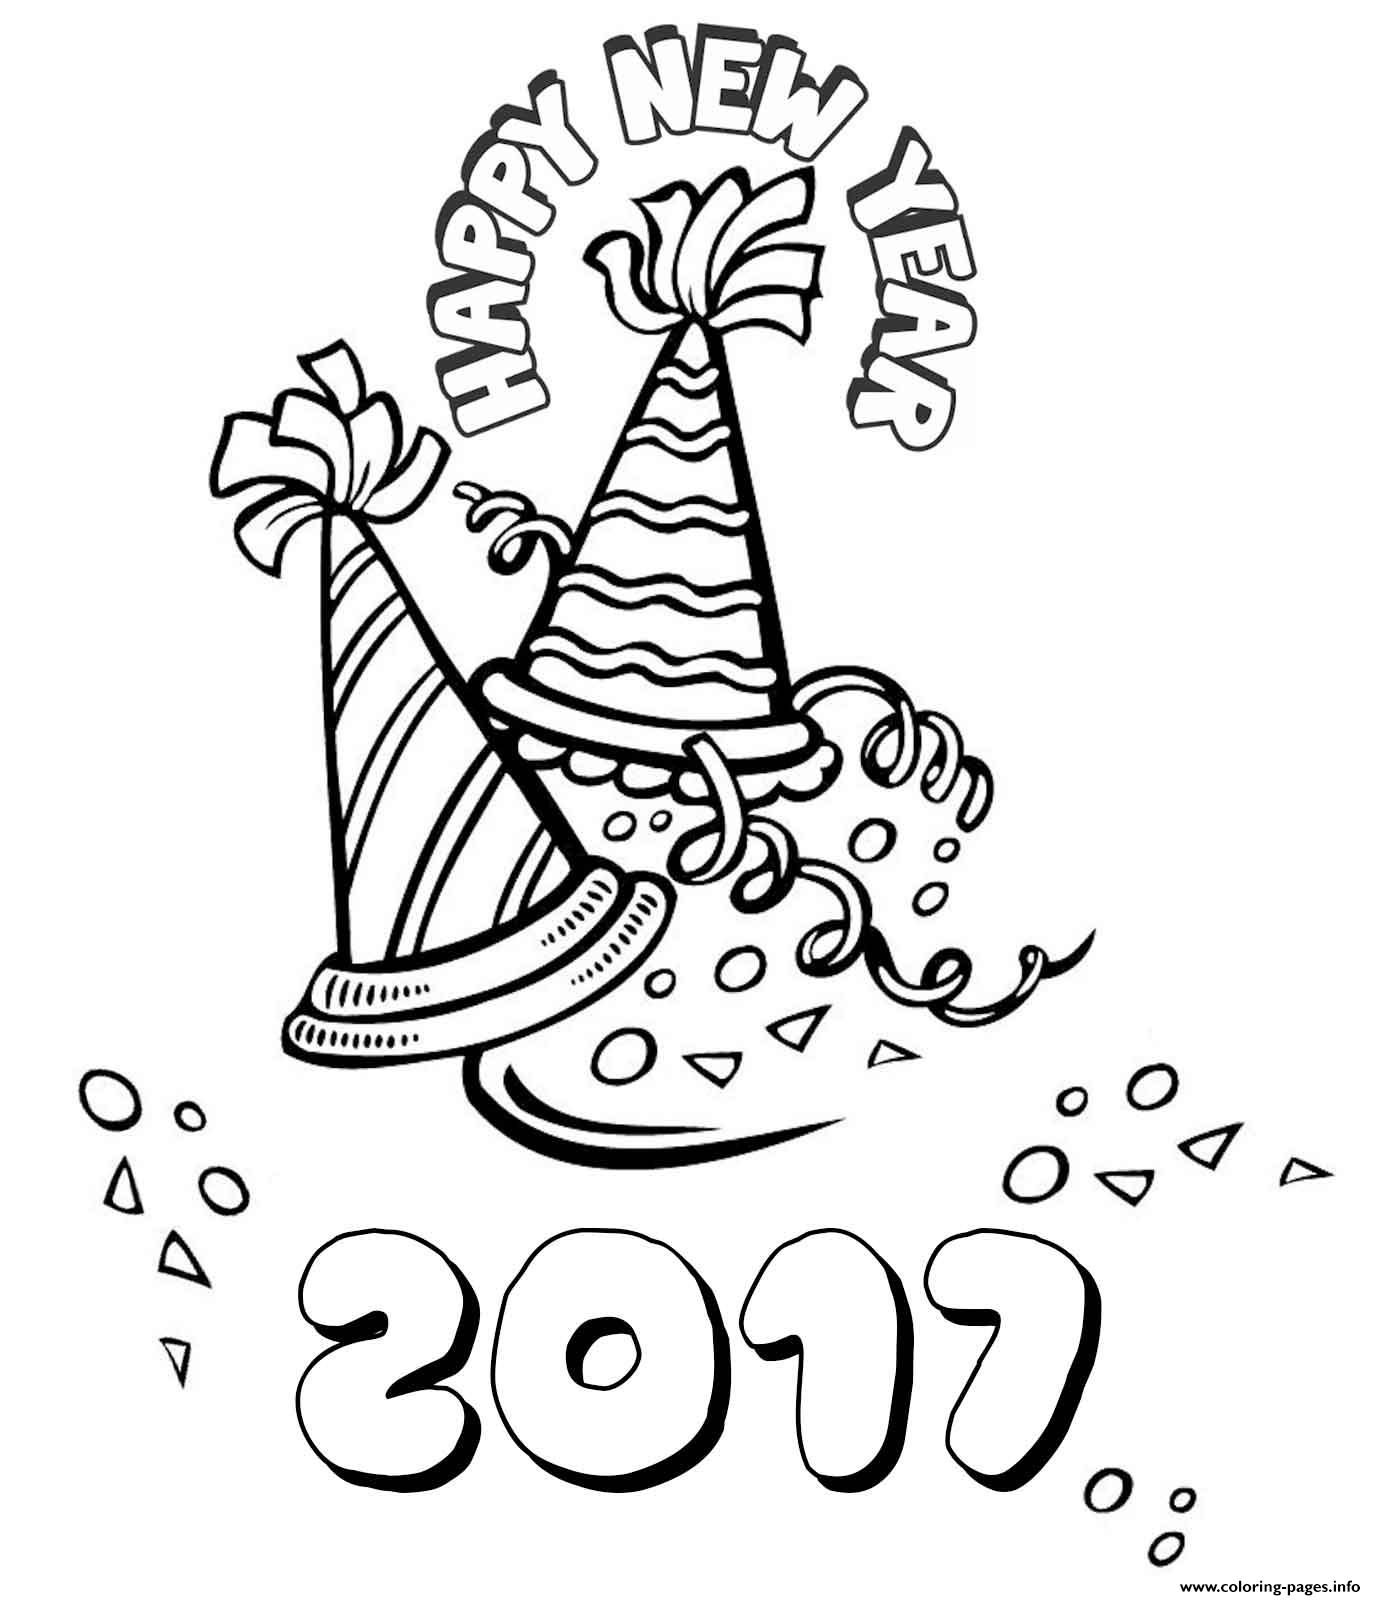 Happy New Year 2017 2 coloring pages